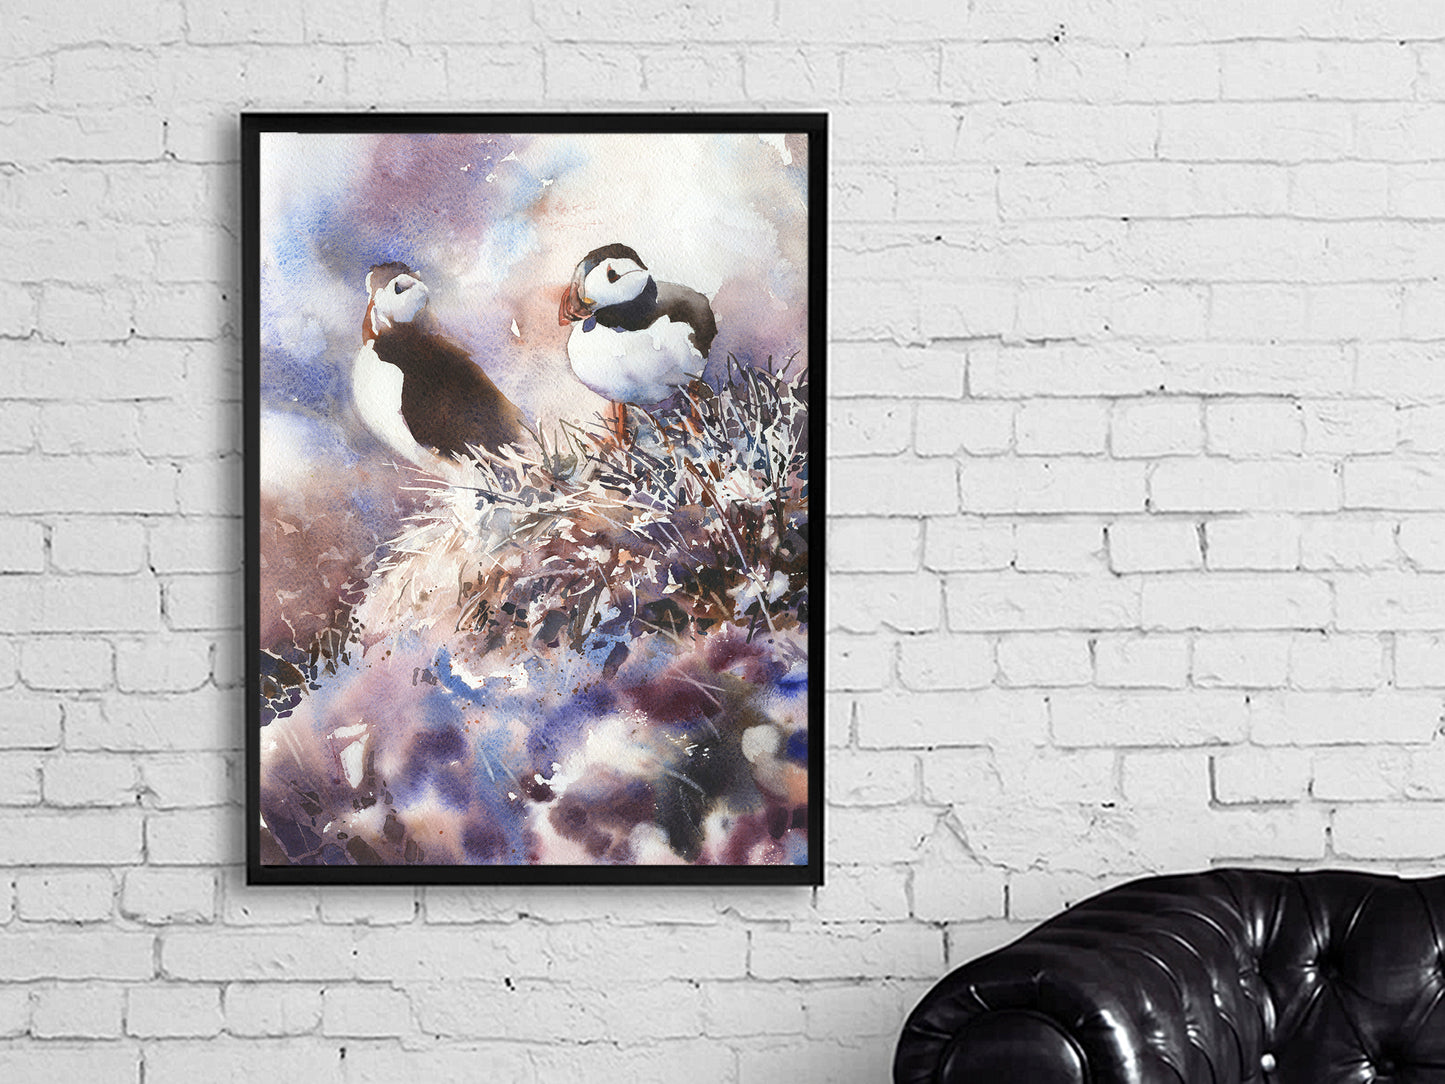 Icelandic puffin fine art watercolor painting.  Watercolor painting Puffin Iceland bird artwork (print)